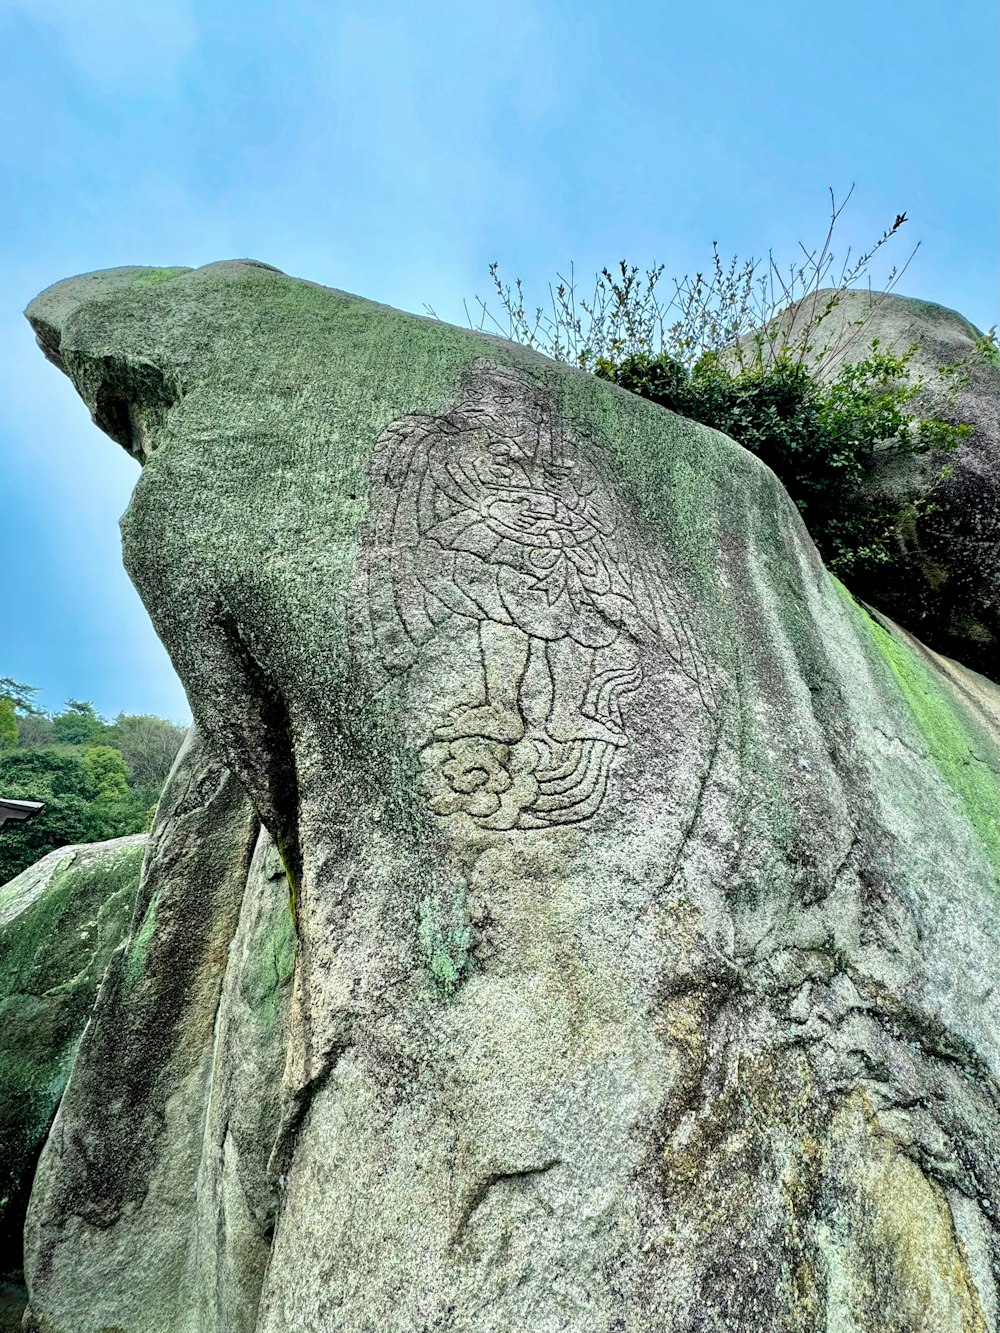 a rock with a carving of a dragon on it